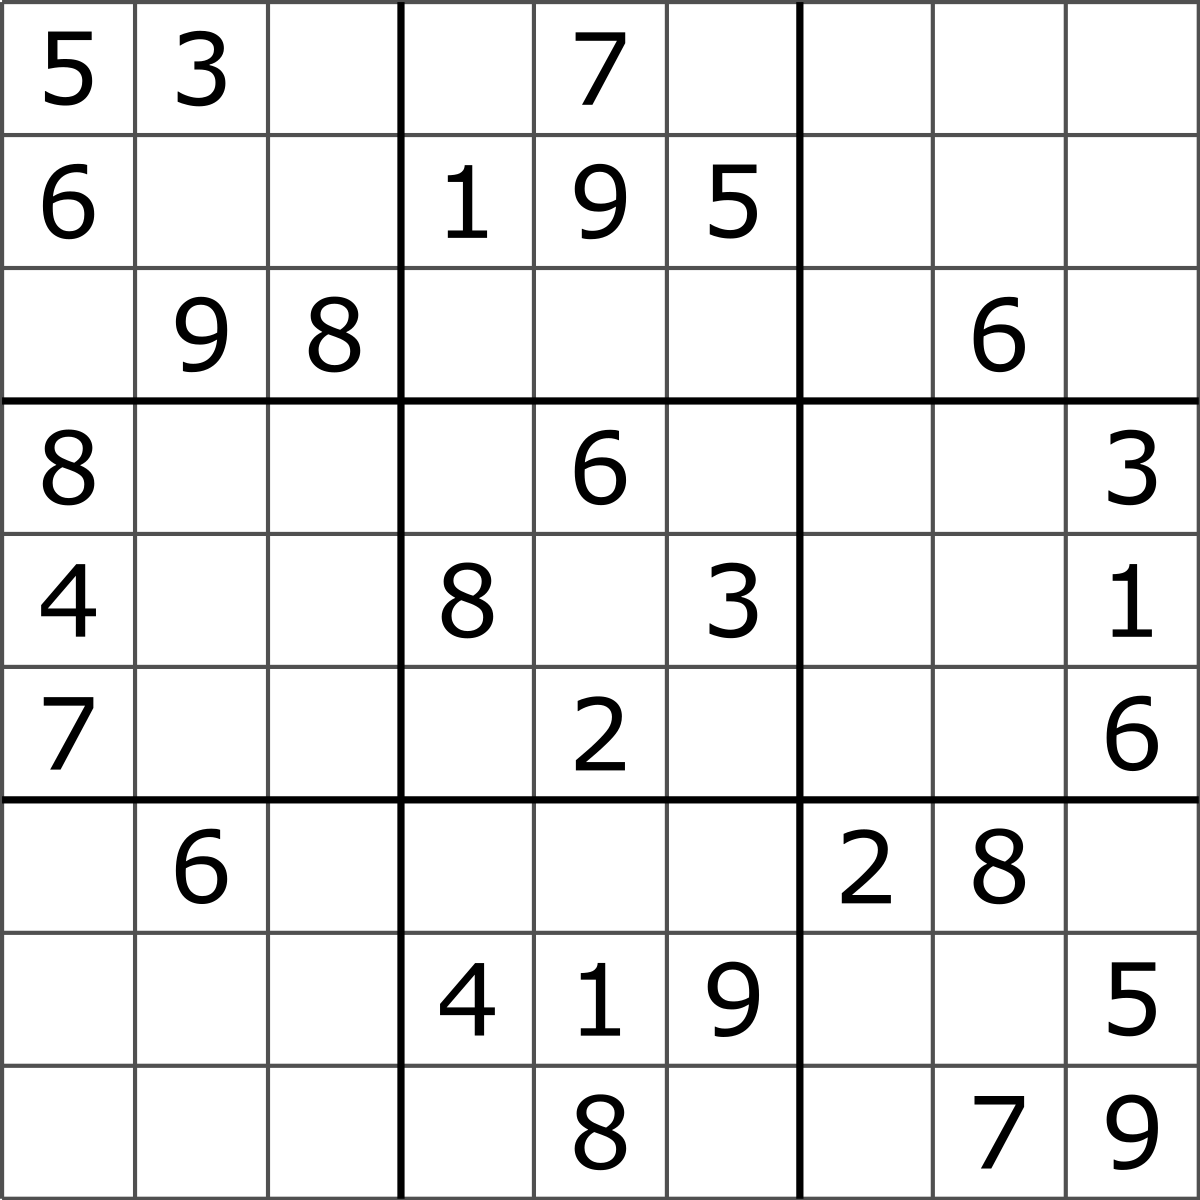 Optical Character Recognition Sudoku Solver - EPITA Project